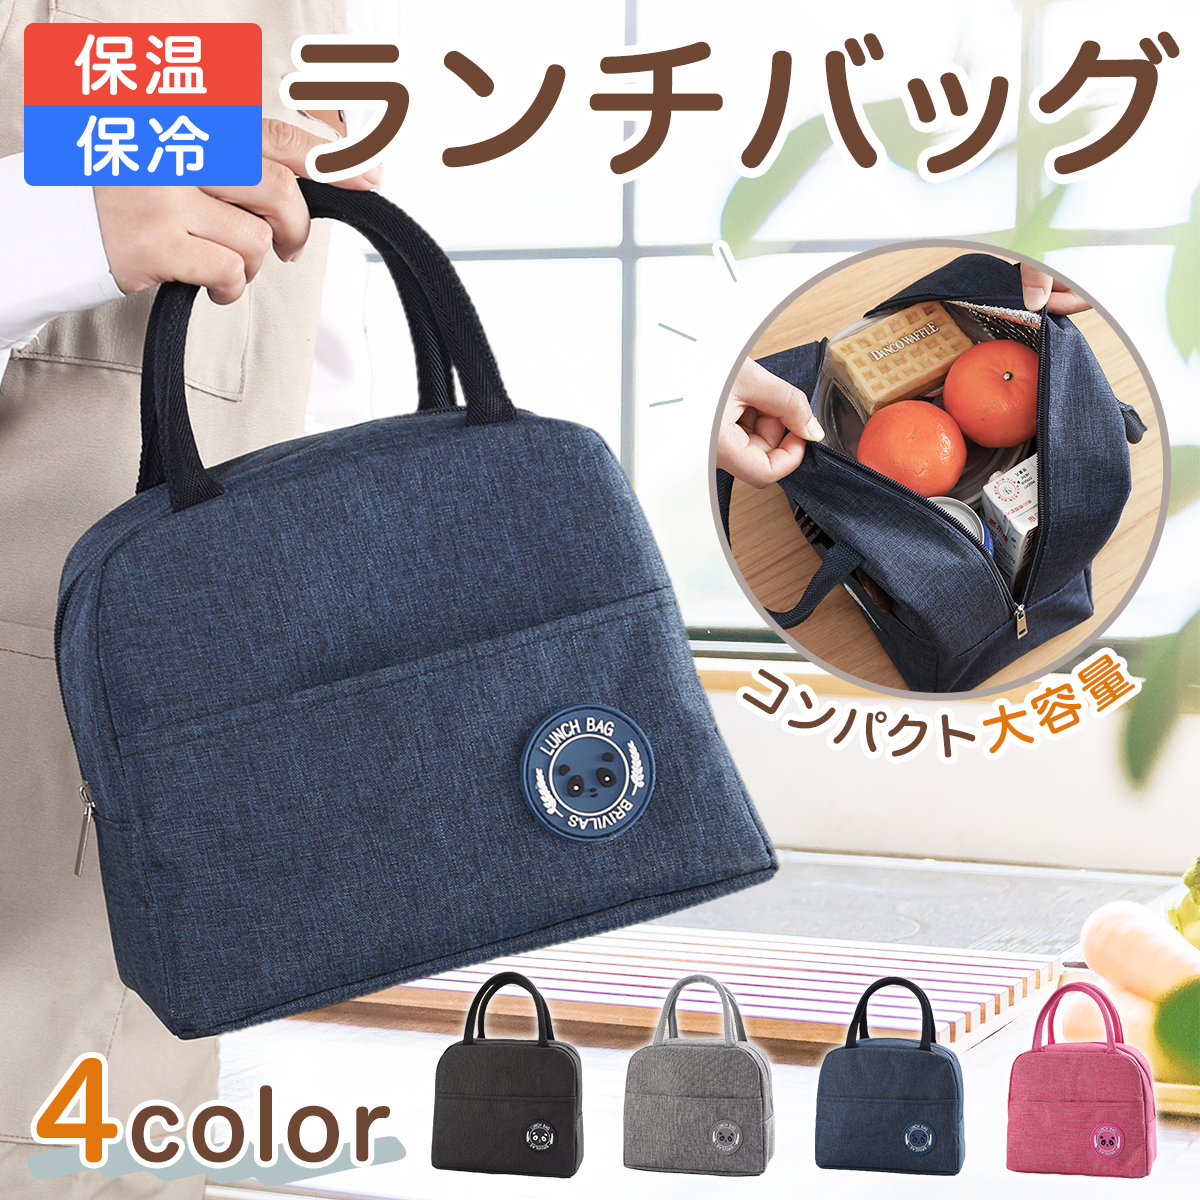  lunch bag keep cool heat insulation stylish lovely largish tote bag lunch tote bag men's compact simple man girl inset wide . length length child 